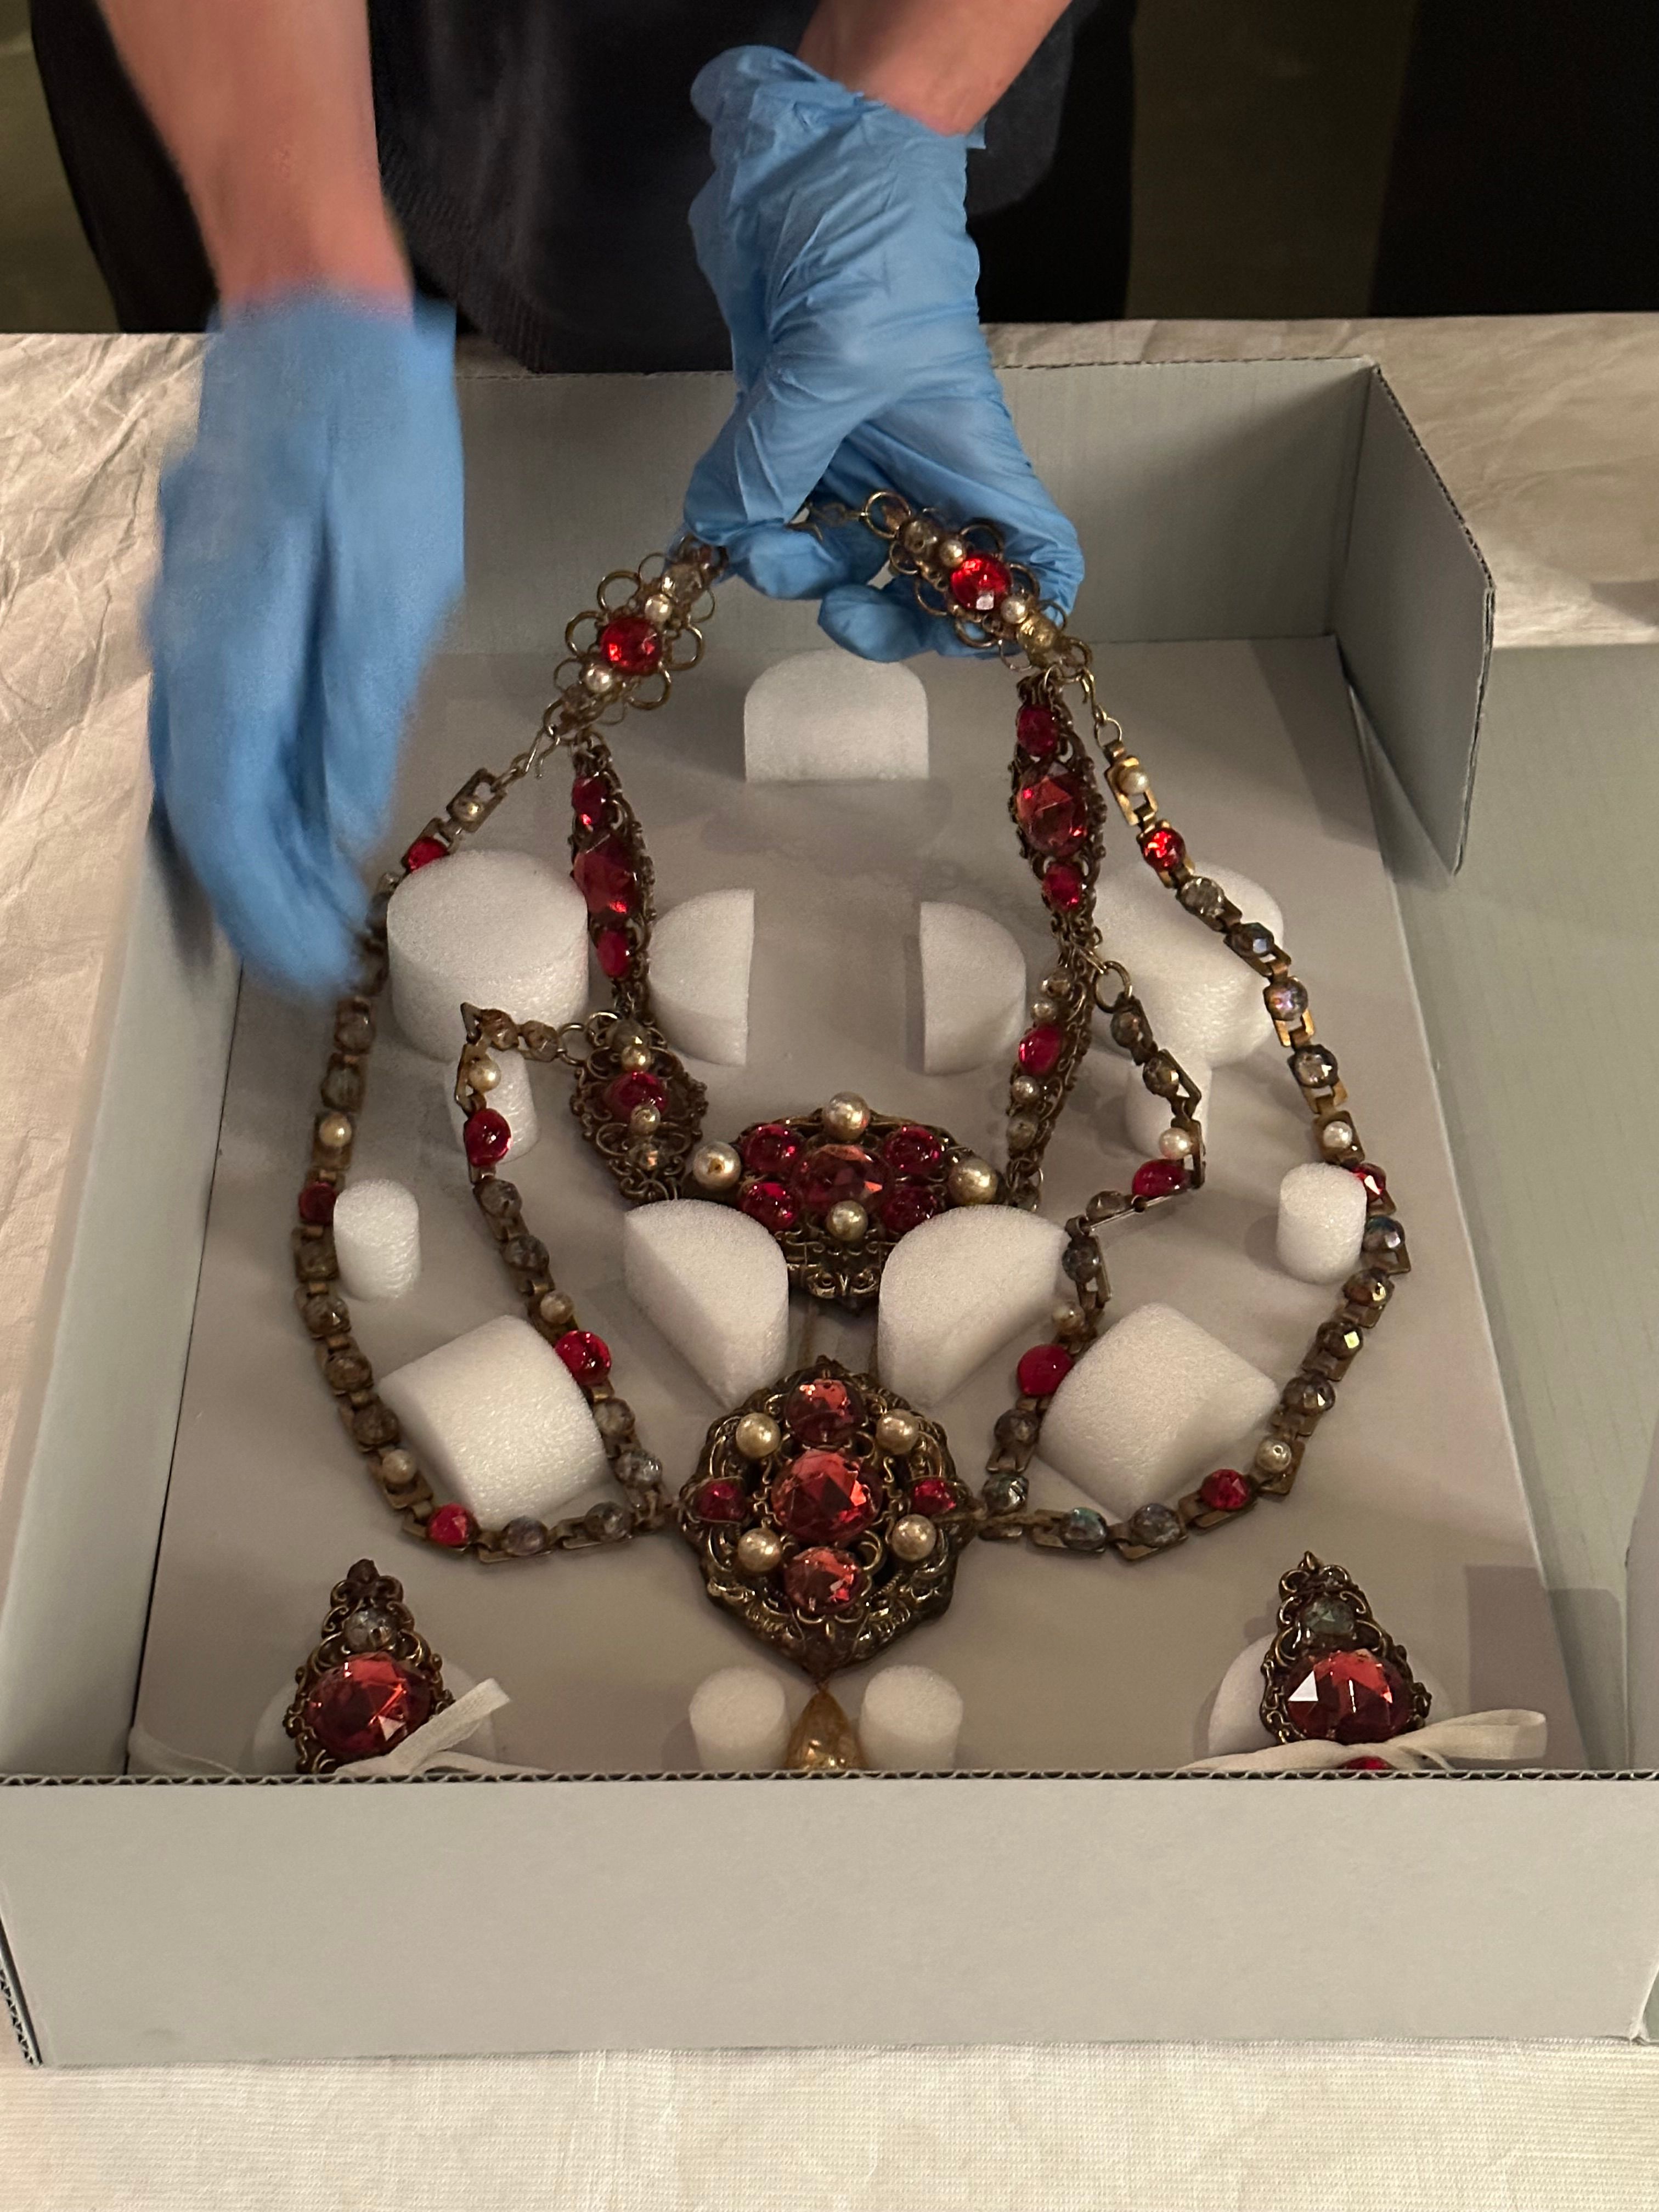 An elaborate multi-strand costume necklace made to resemble gold, pearls and rubies is being removed from a grey cardboard box. The box has many small shaped segments of foam set within it which hold the necklace segments in place.   